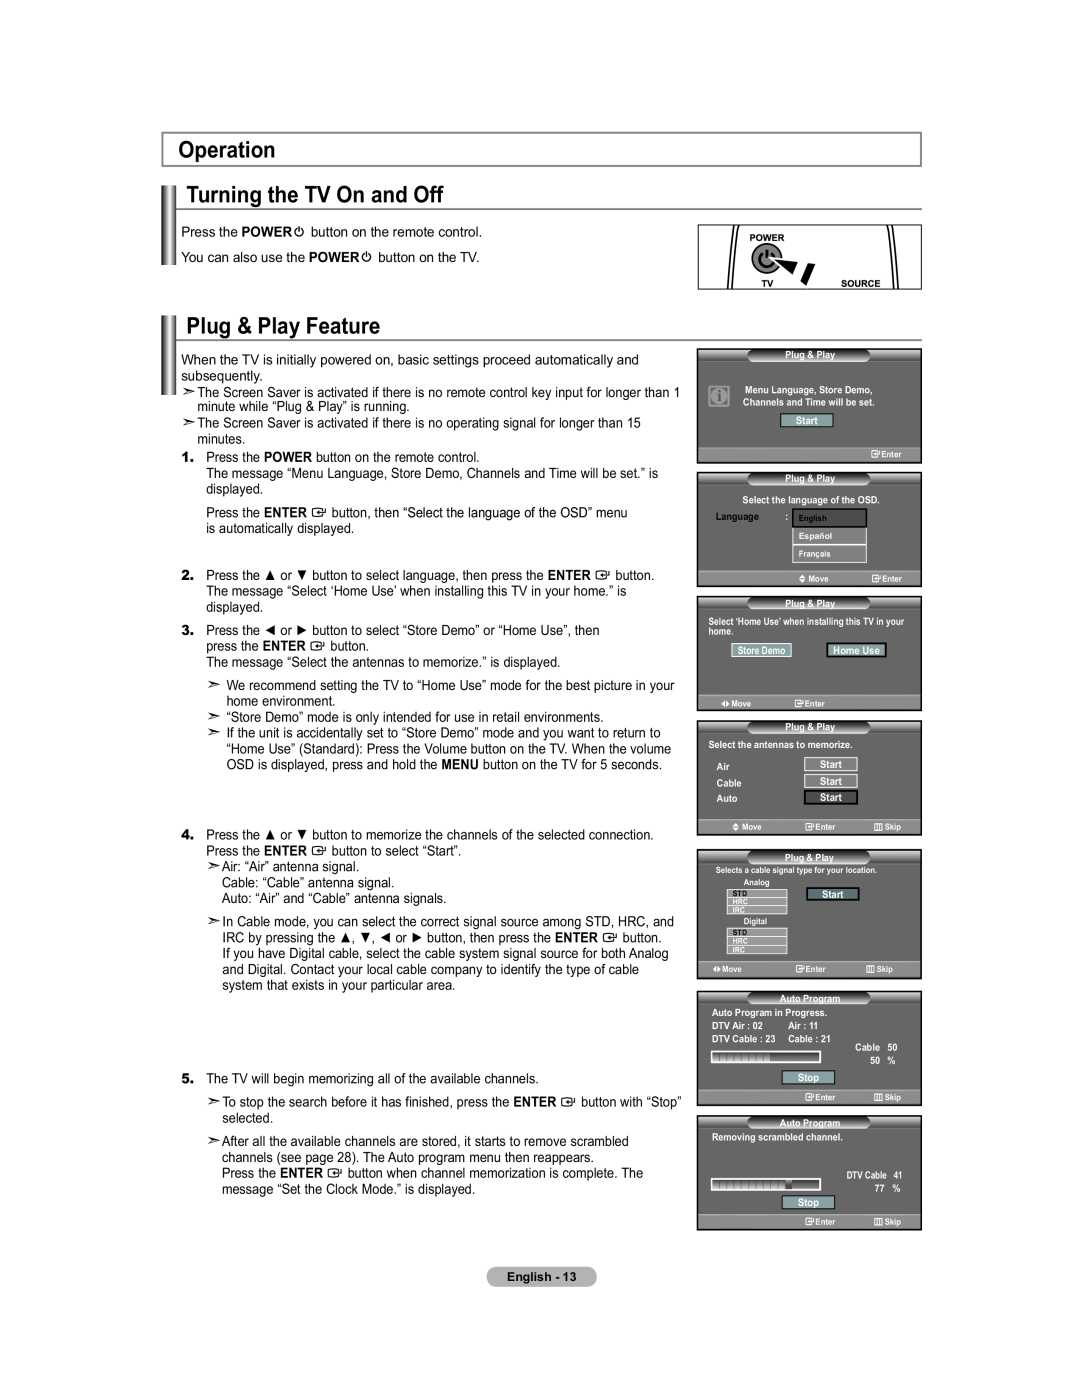 Samsung 451 user manual Operation Turning the TV On and Off, Plug & Play Feature, Enter 